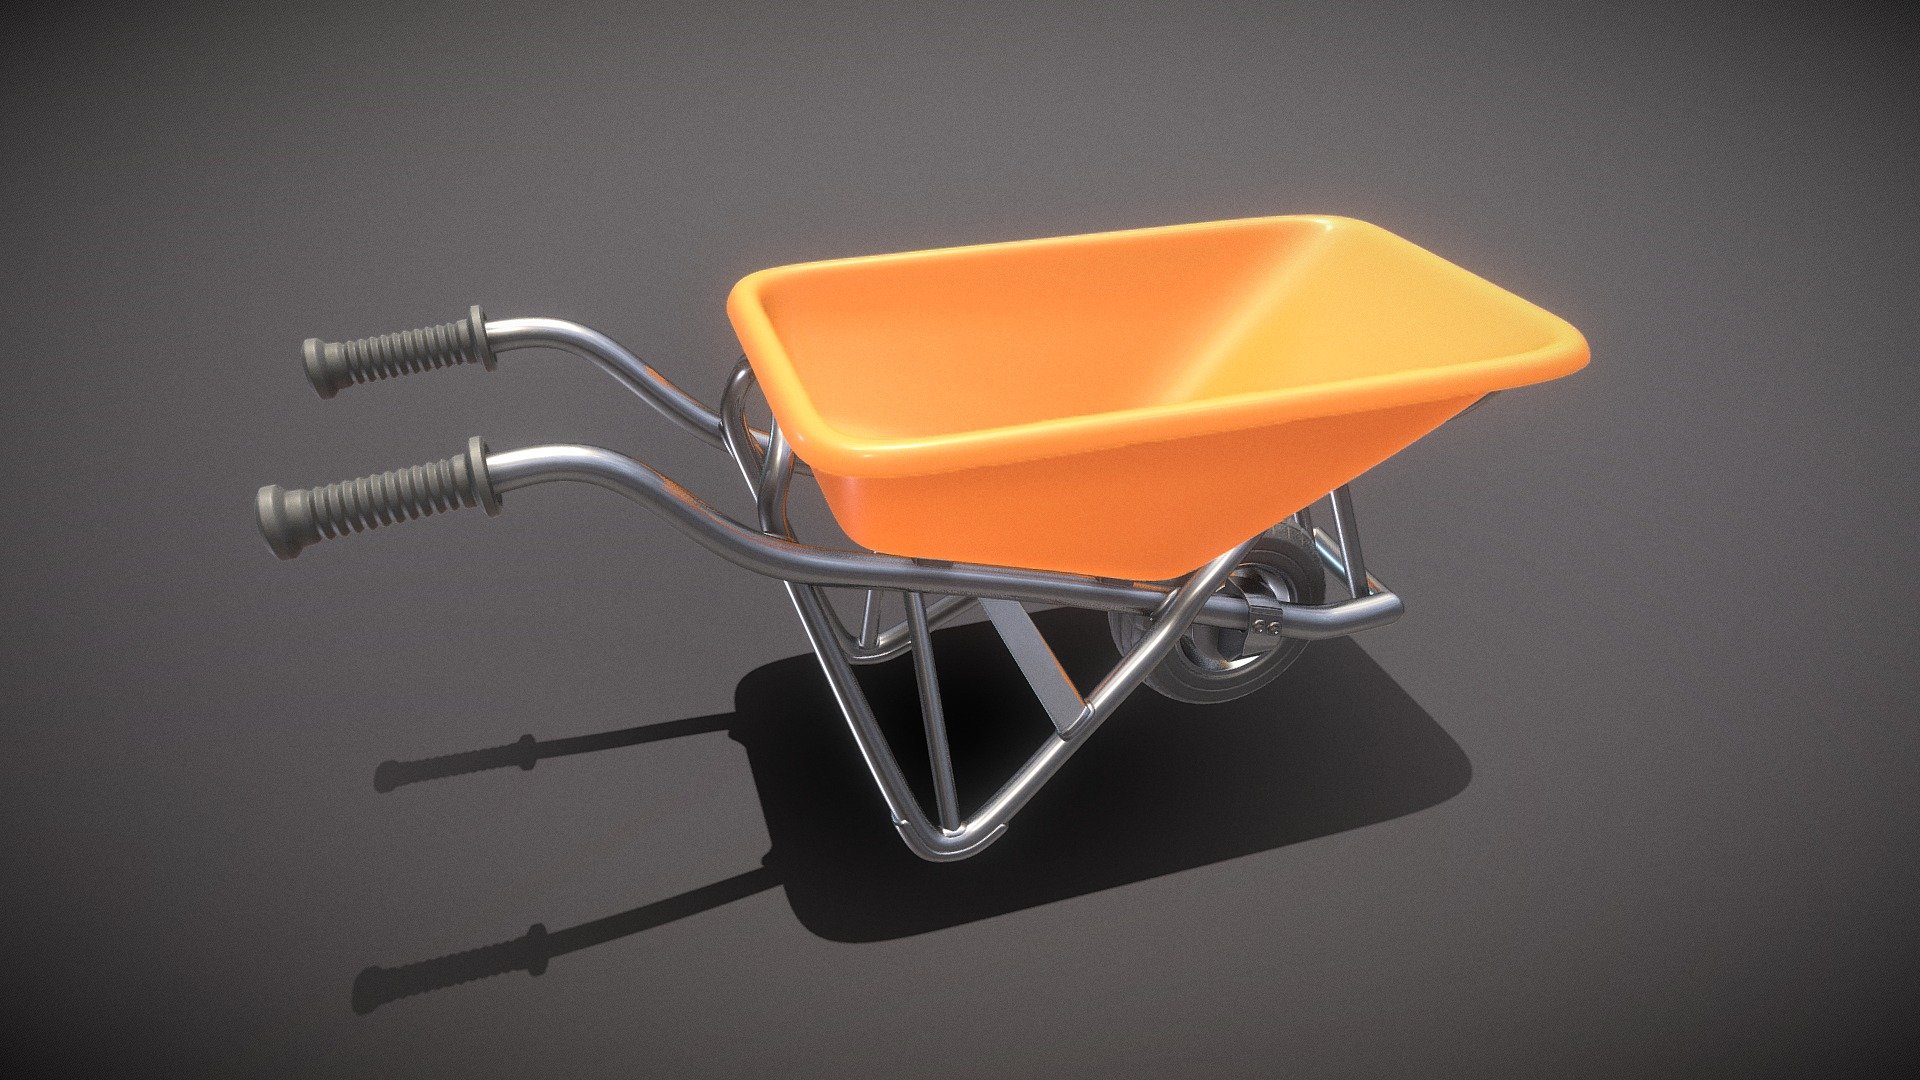 Here is the rigged high-poly version of wheelbarrow 1




Object Name - Wheelbarrow_Rigged 

Object Dimensions -  0.680m x 1.641m x 0.720m

Vertices = 552468

Edges = 1104834

Polygons = 552436



3D model formats: 




Native format (*.blend)

Autodesk FBX (.fbx)

OBJ (.obj, .mtl)

glTF (.gltf, .glb)

X3D (.x3d)

Collada (.dae)

Stereolithography (.stl)

Polygon File Format (.ply)

Alembic (.abc)

DXF (.dxf)

USDC







Modeled and rigged by 3DHaupt in Blender-2.90.1 - Wheelbarrow 1 Rigged Version (High-Poly) - Buy Royalty Free 3D model by VIS-All-3D (@VIS-All) 3d model